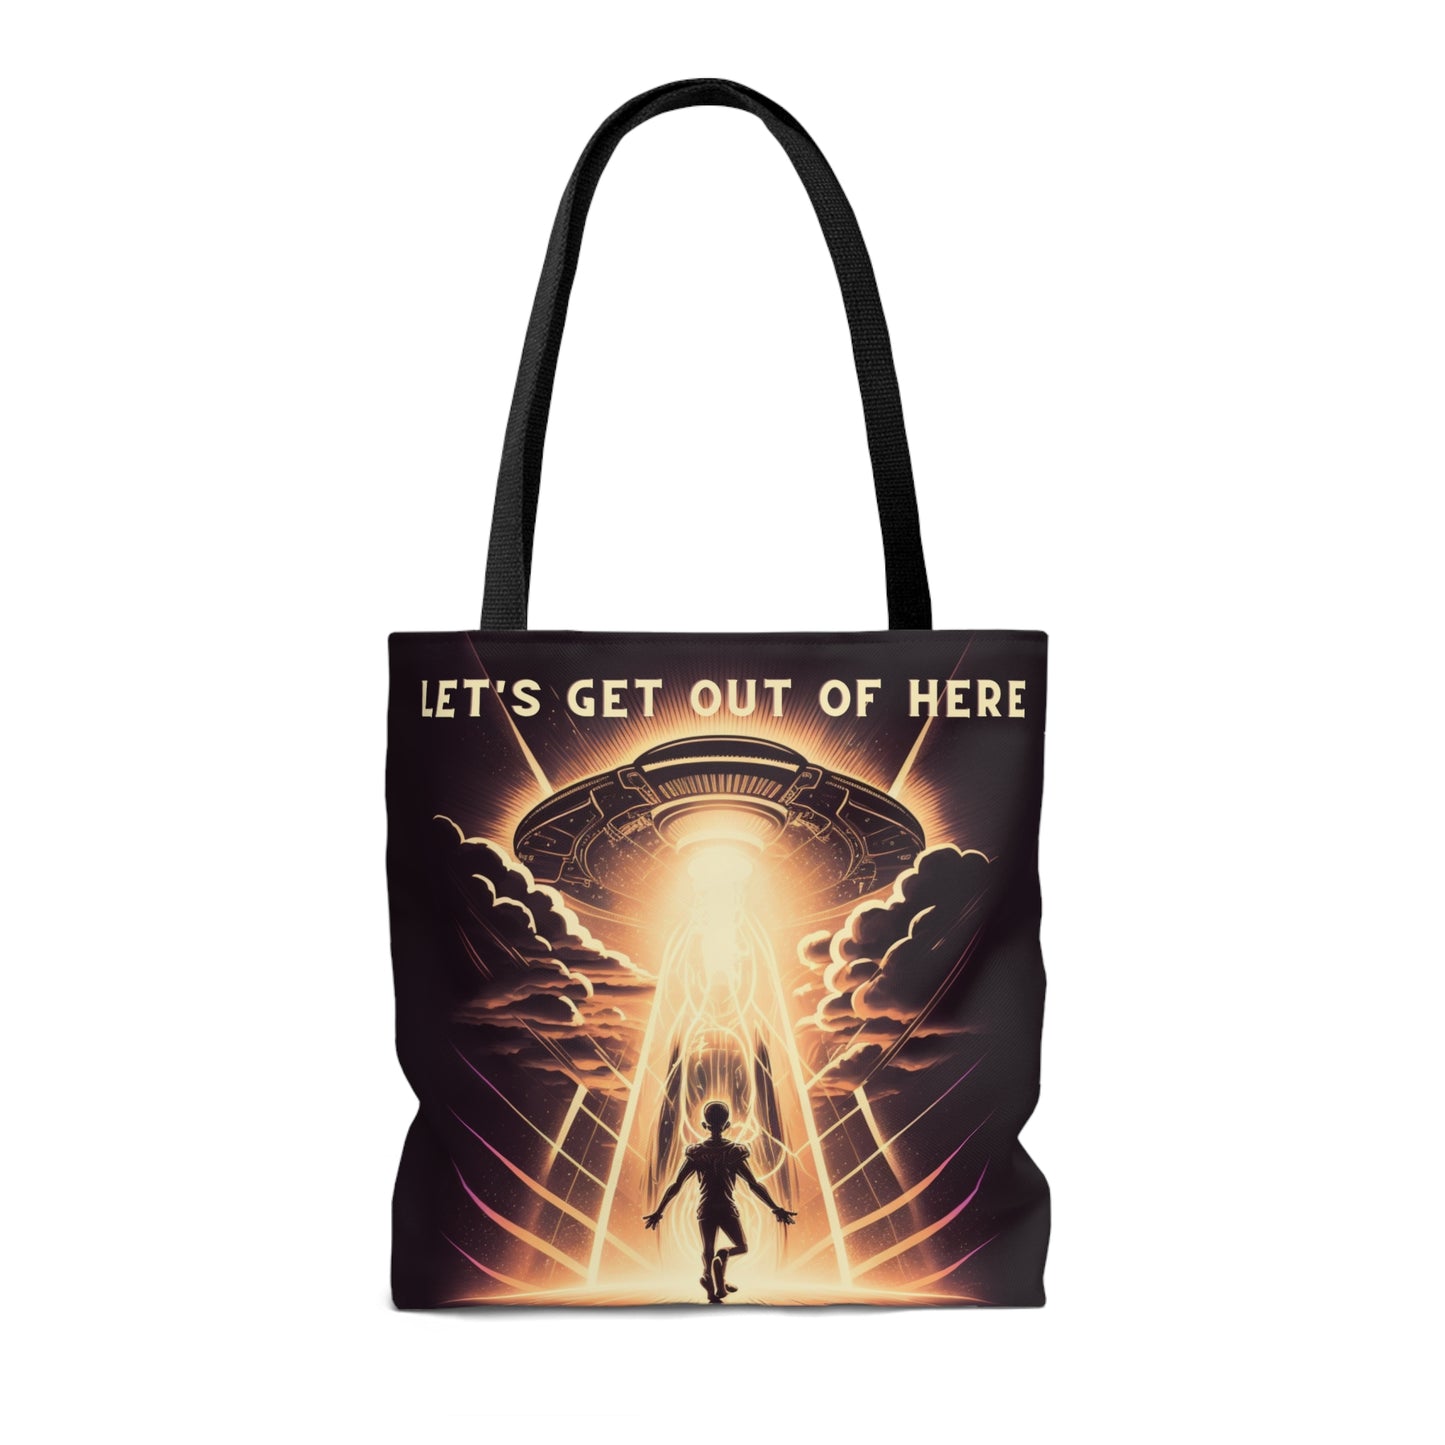 "Let's Get Out of Here" - Tote Bag